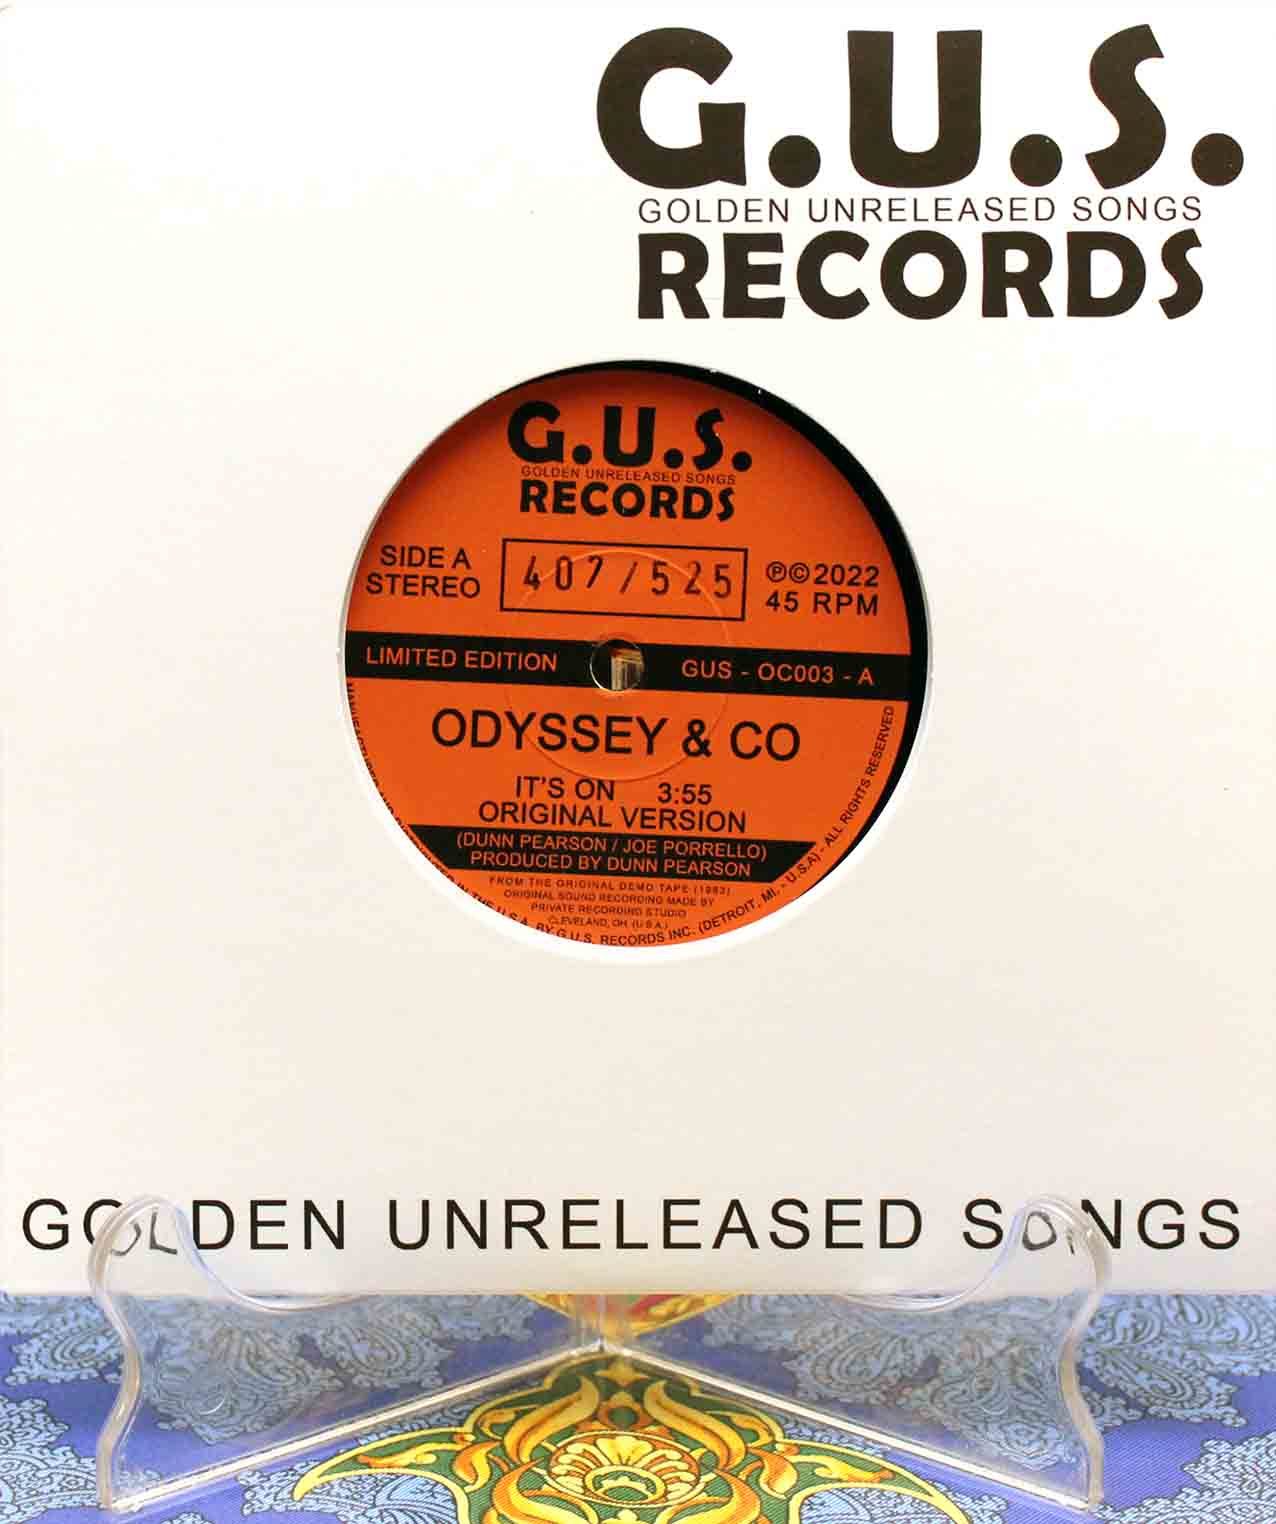 Odyssey Co - Its On 01